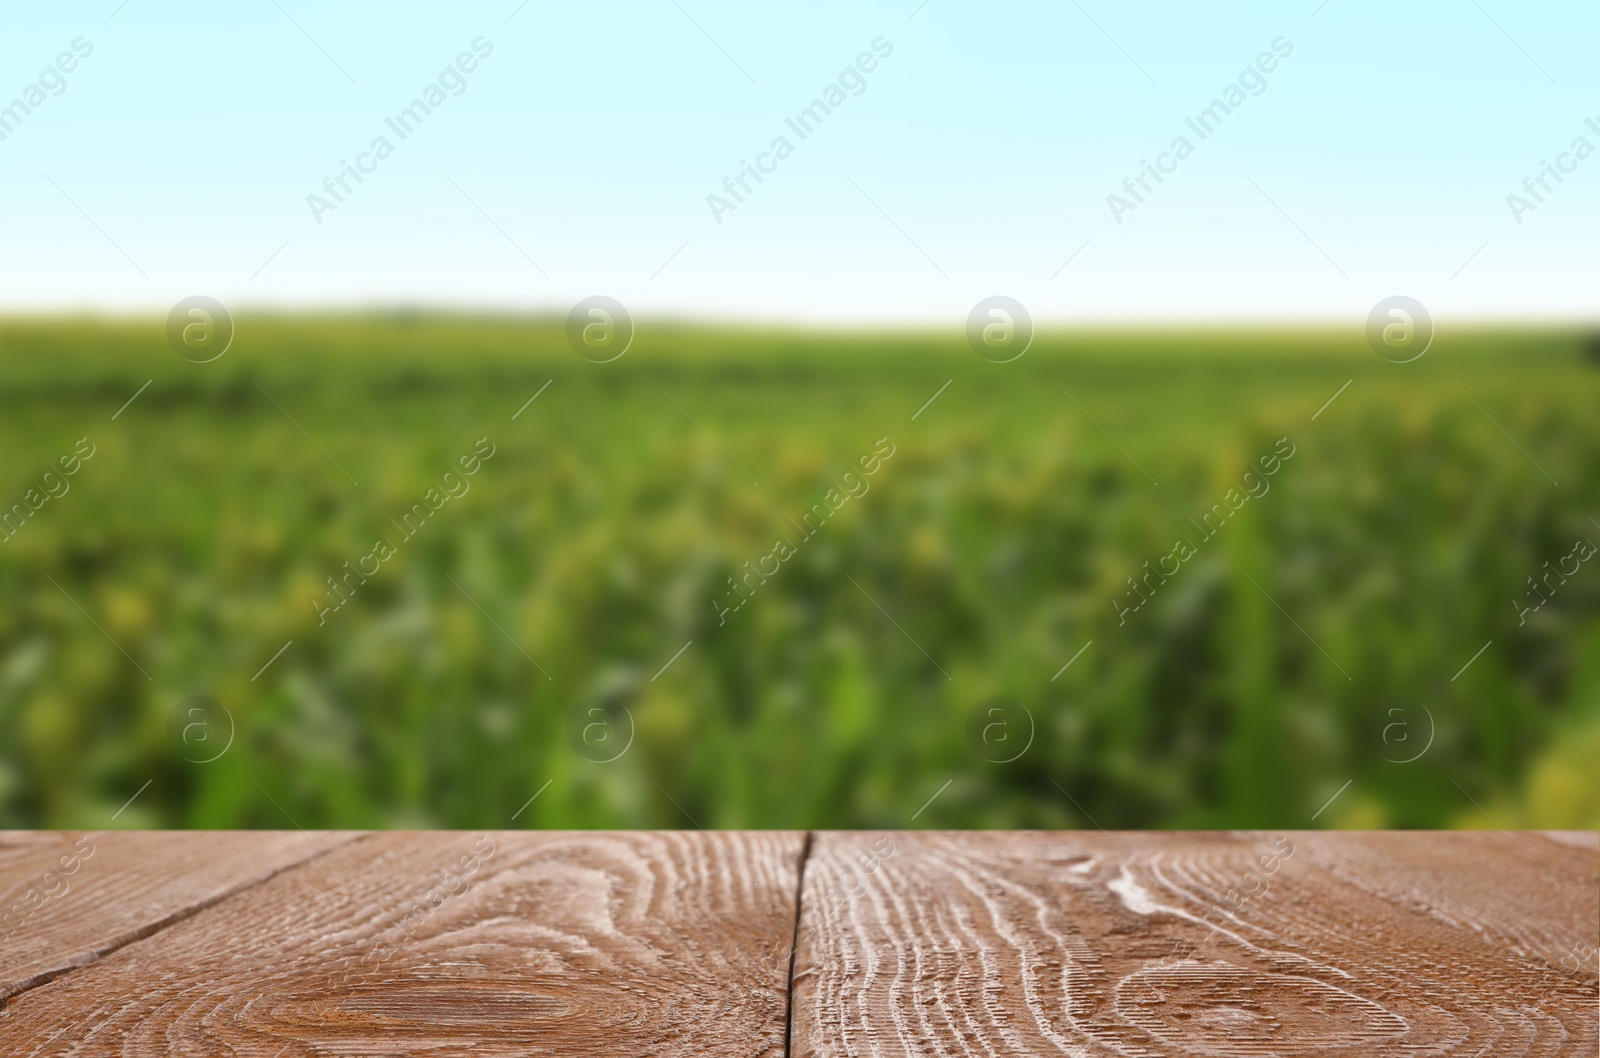 Image of Empty wooden surface in beautiful corn field. Space for text